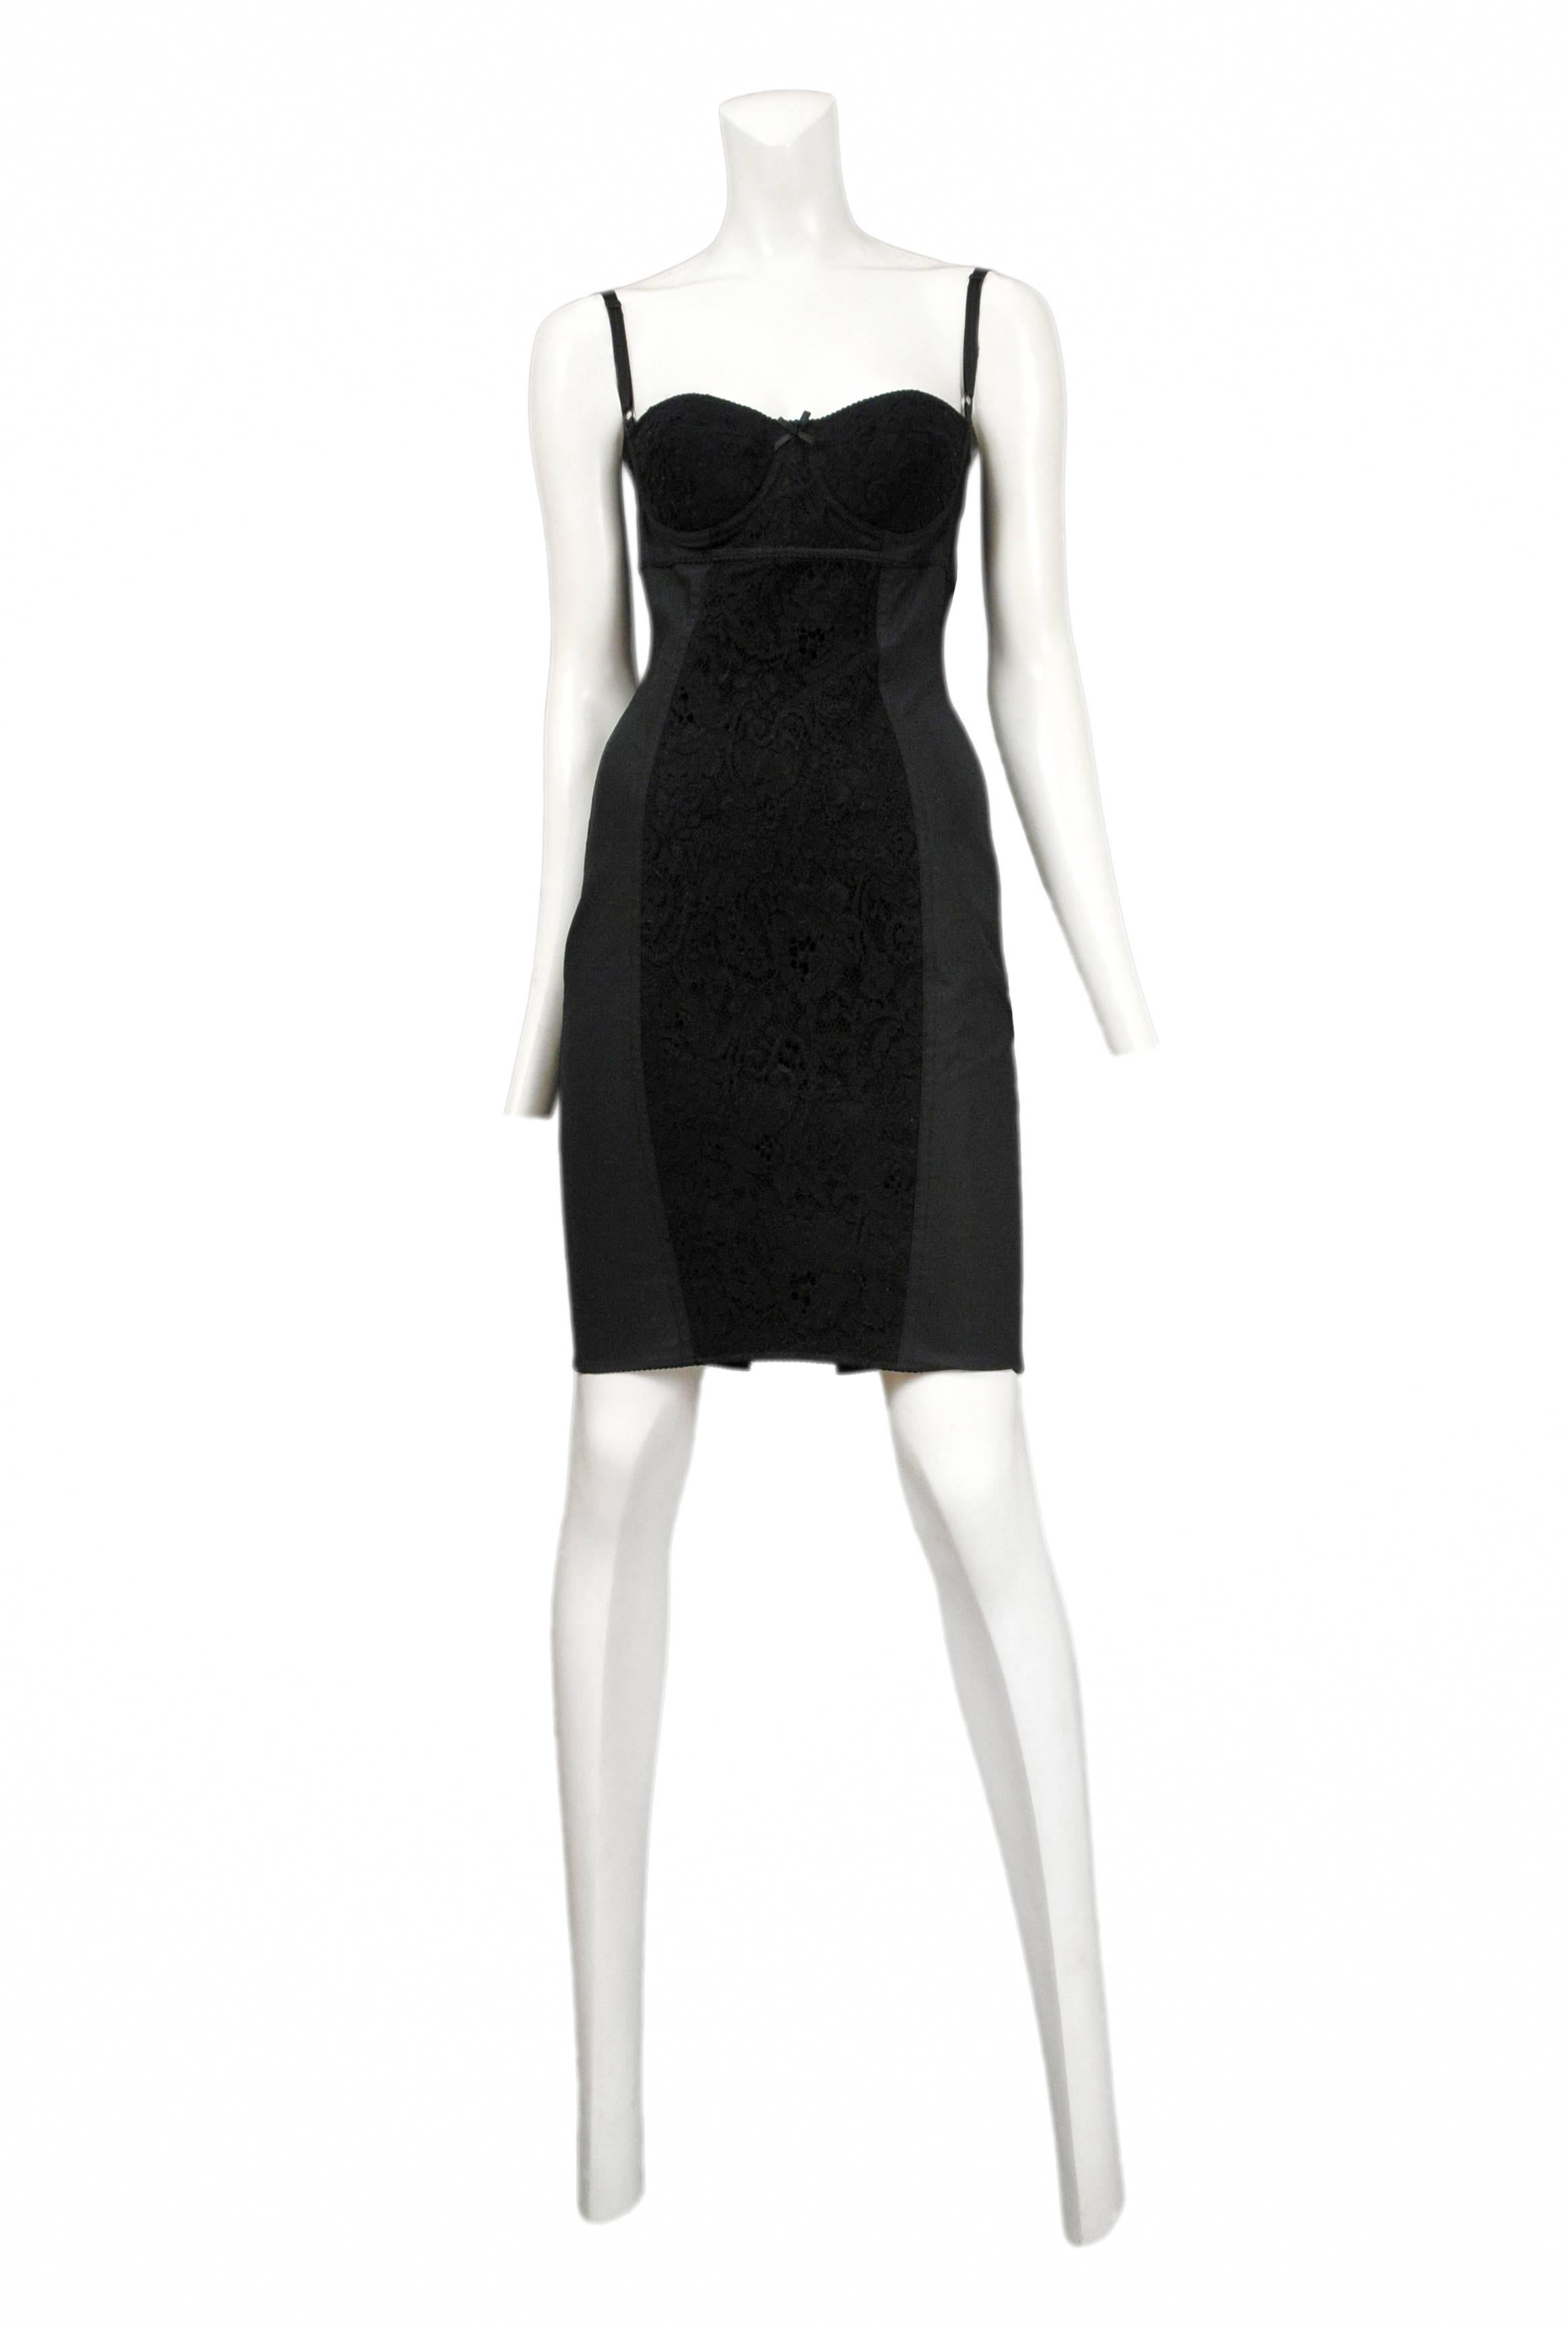 Dolce and Gabbana lace panel corset dress with boning and adjustable straps.
